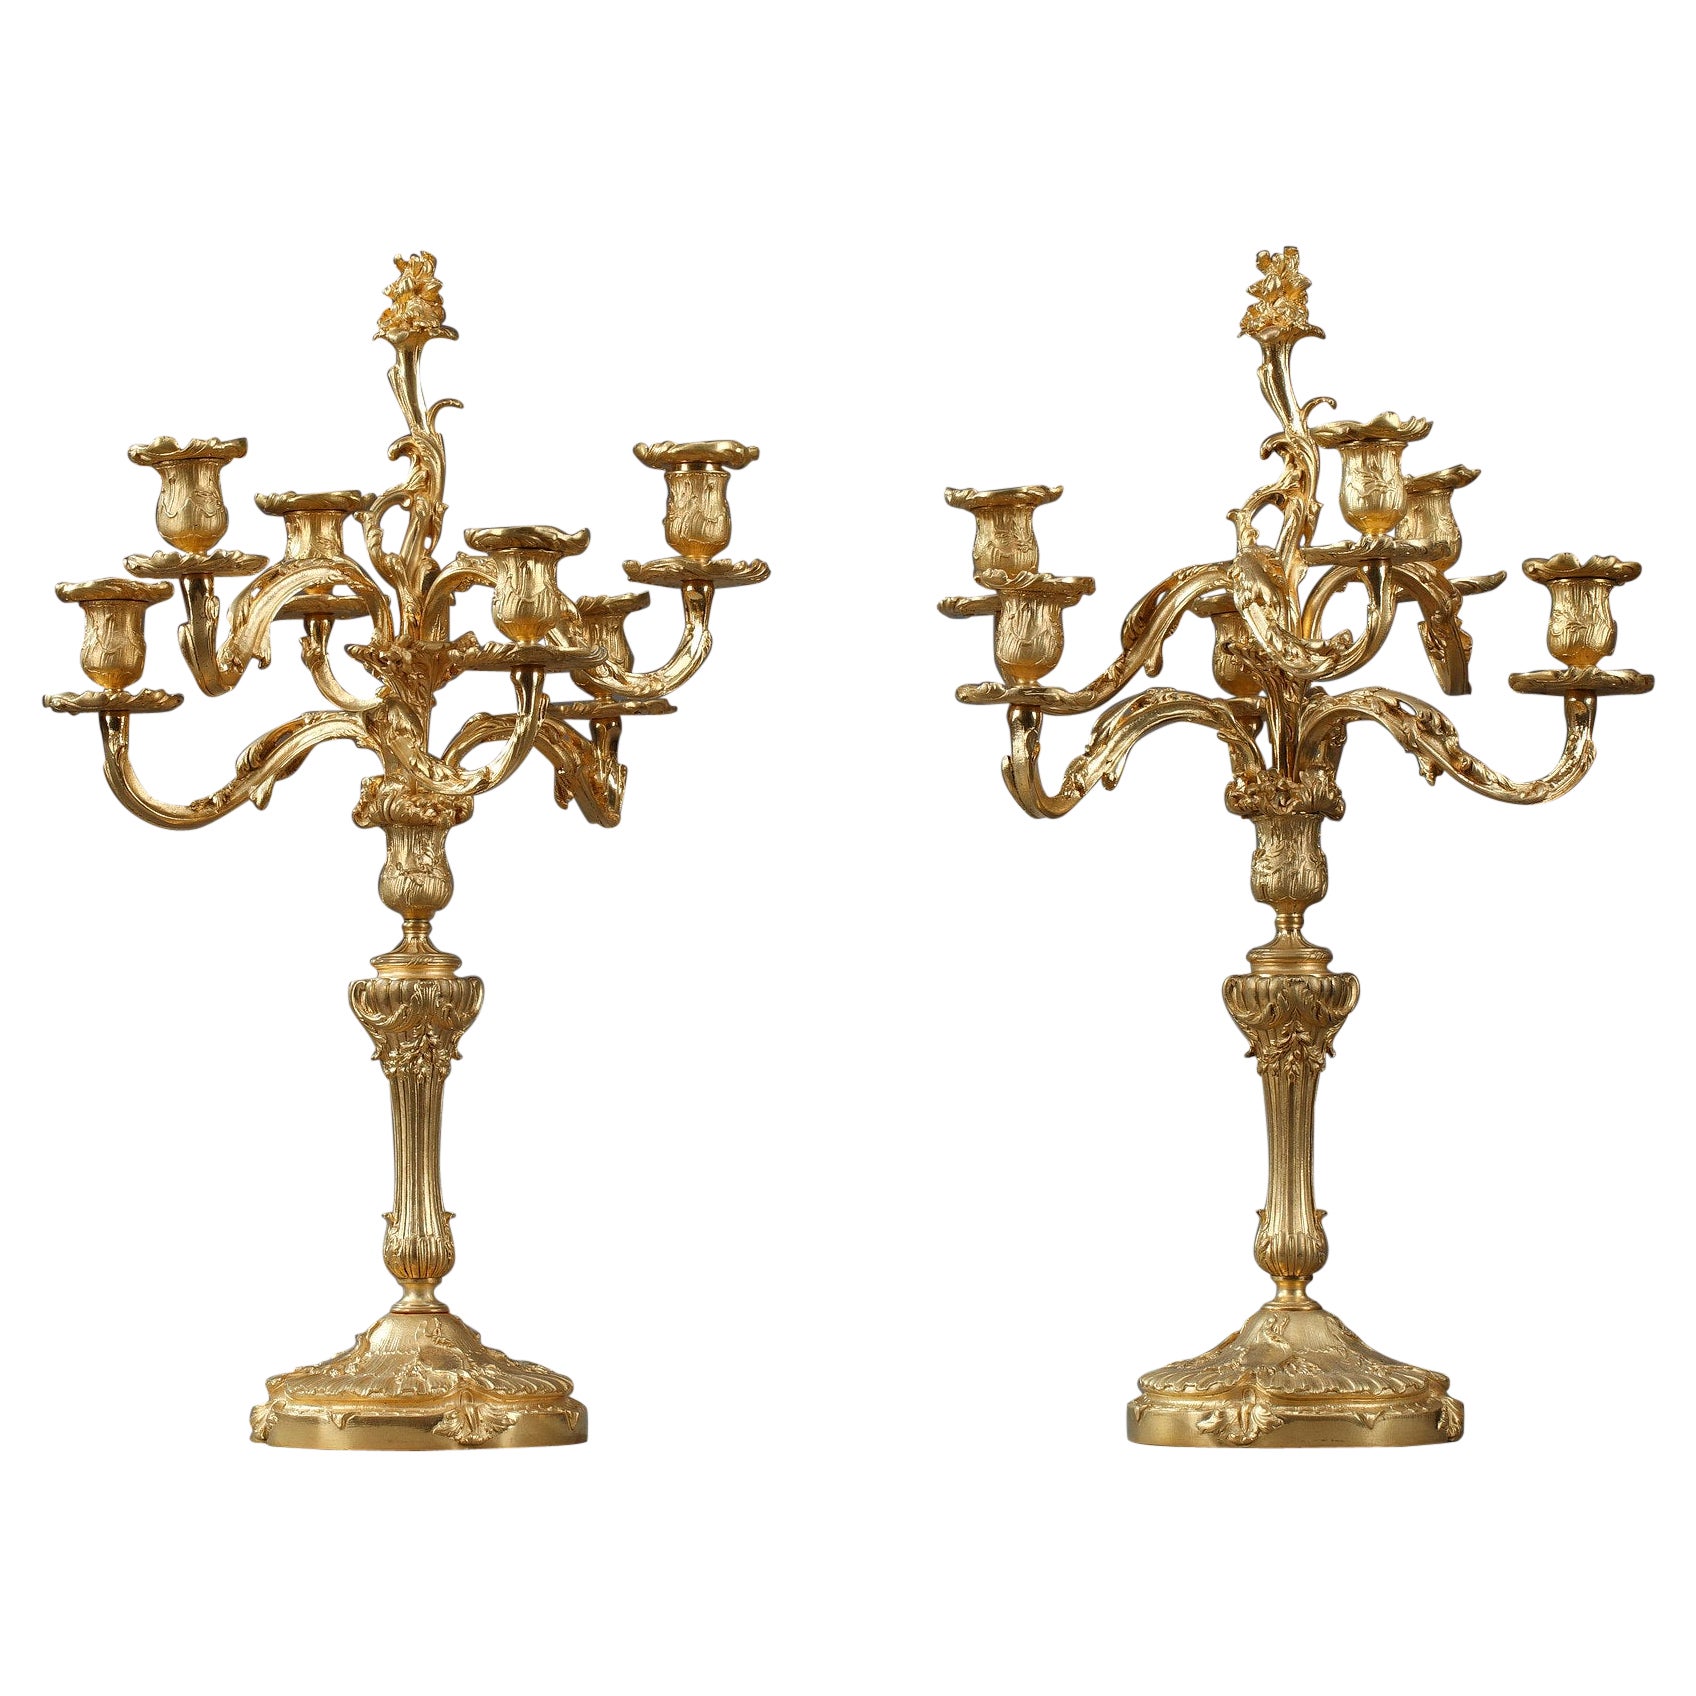 Pair of Rocaille Style Candelabras in Gilt Bronze